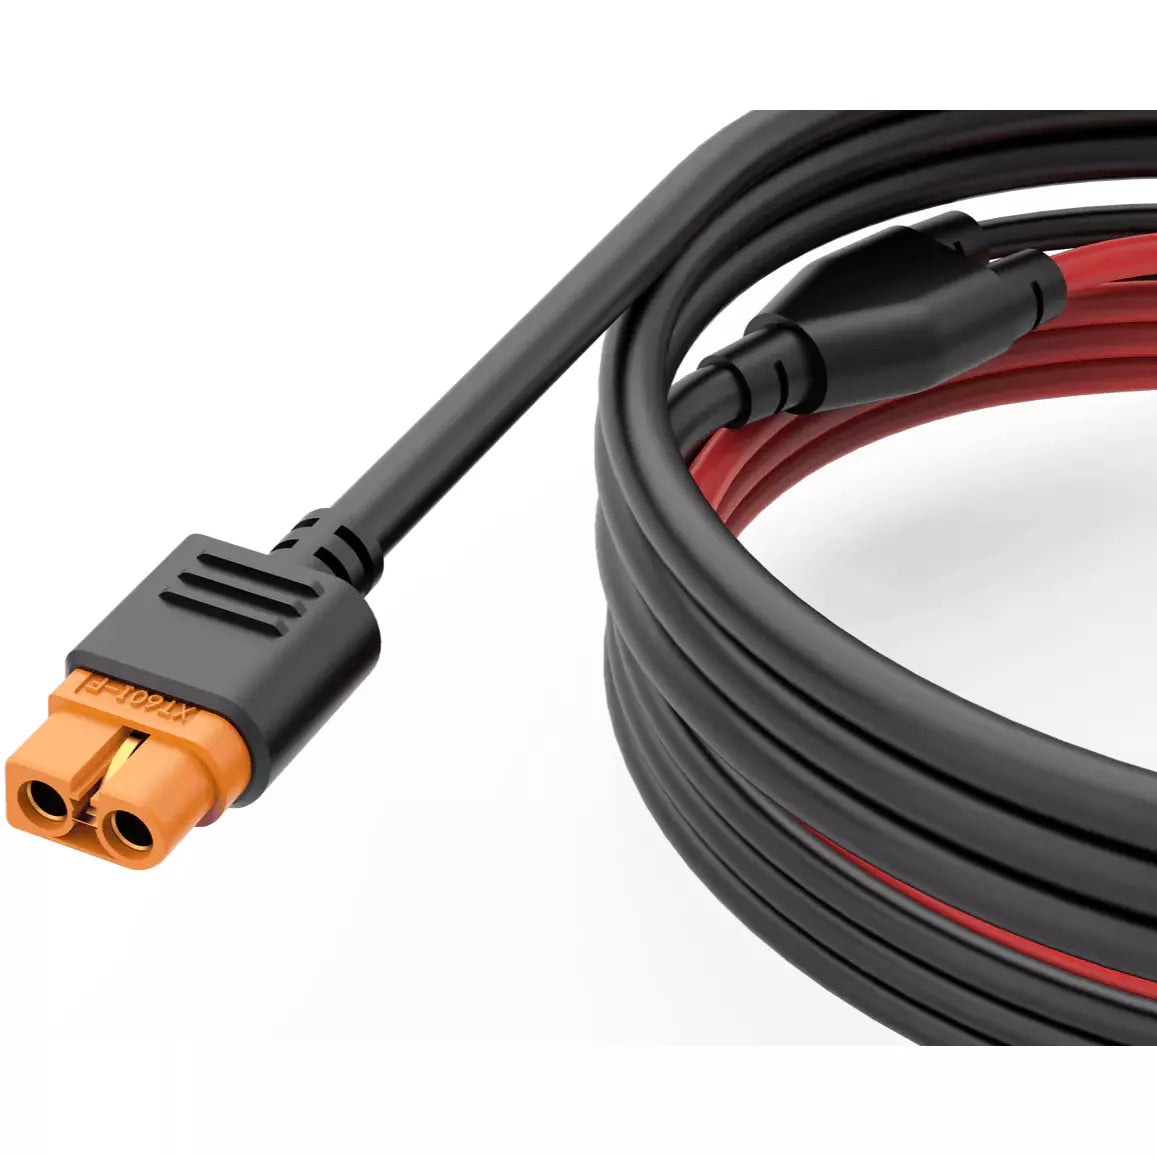 EcoFlow Solar to XT60i Charging Cable - New Star Living